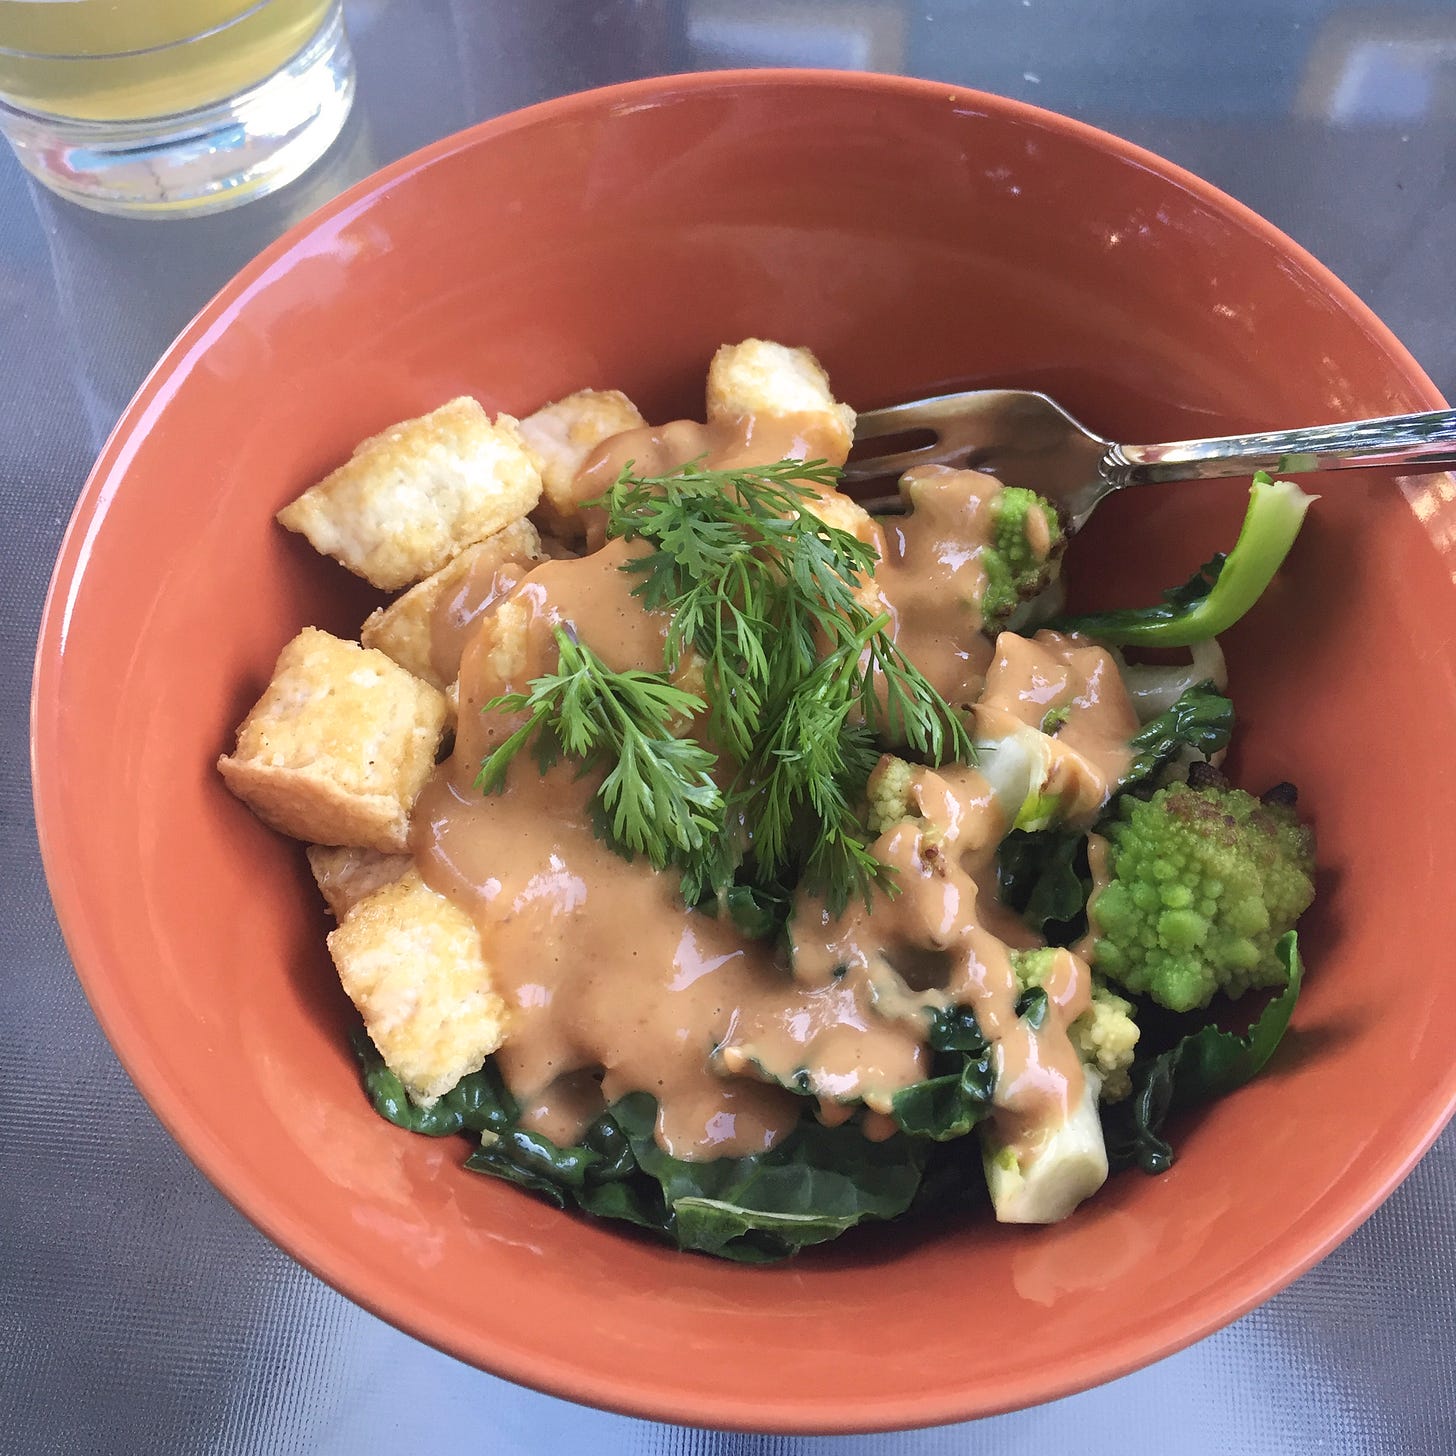 An orange bowl with romanesco broccoli, kale leaves, and crispy pieces of tofu with peanut sauce and cilantro overtop.